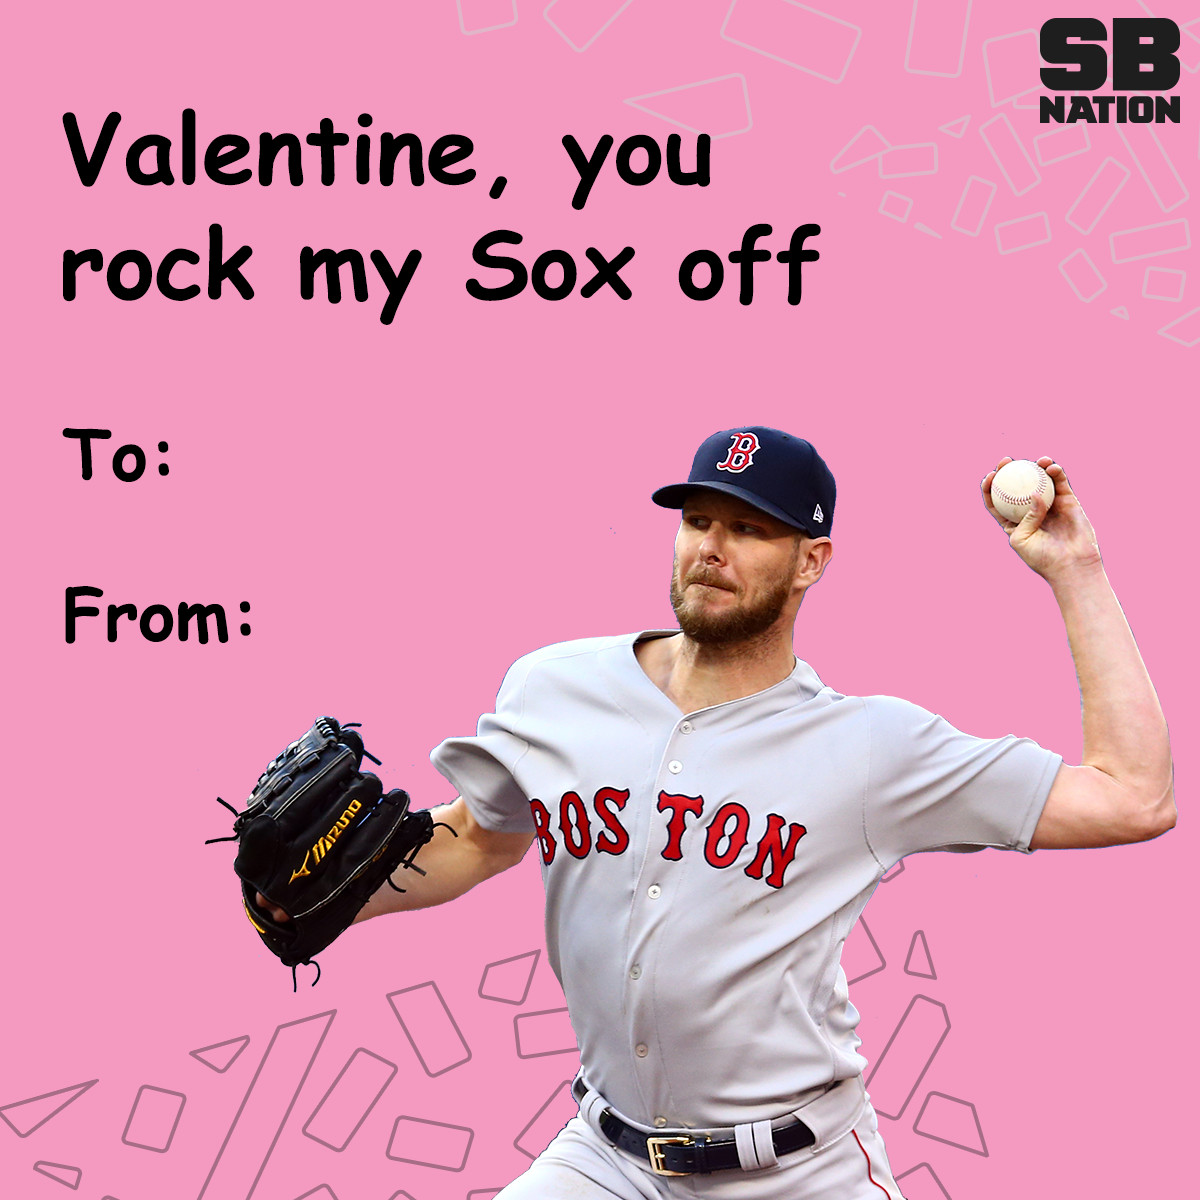 Image of Boston Red Sox pitcher Chris Sale with the text “Valentine, you rock my Sox off”